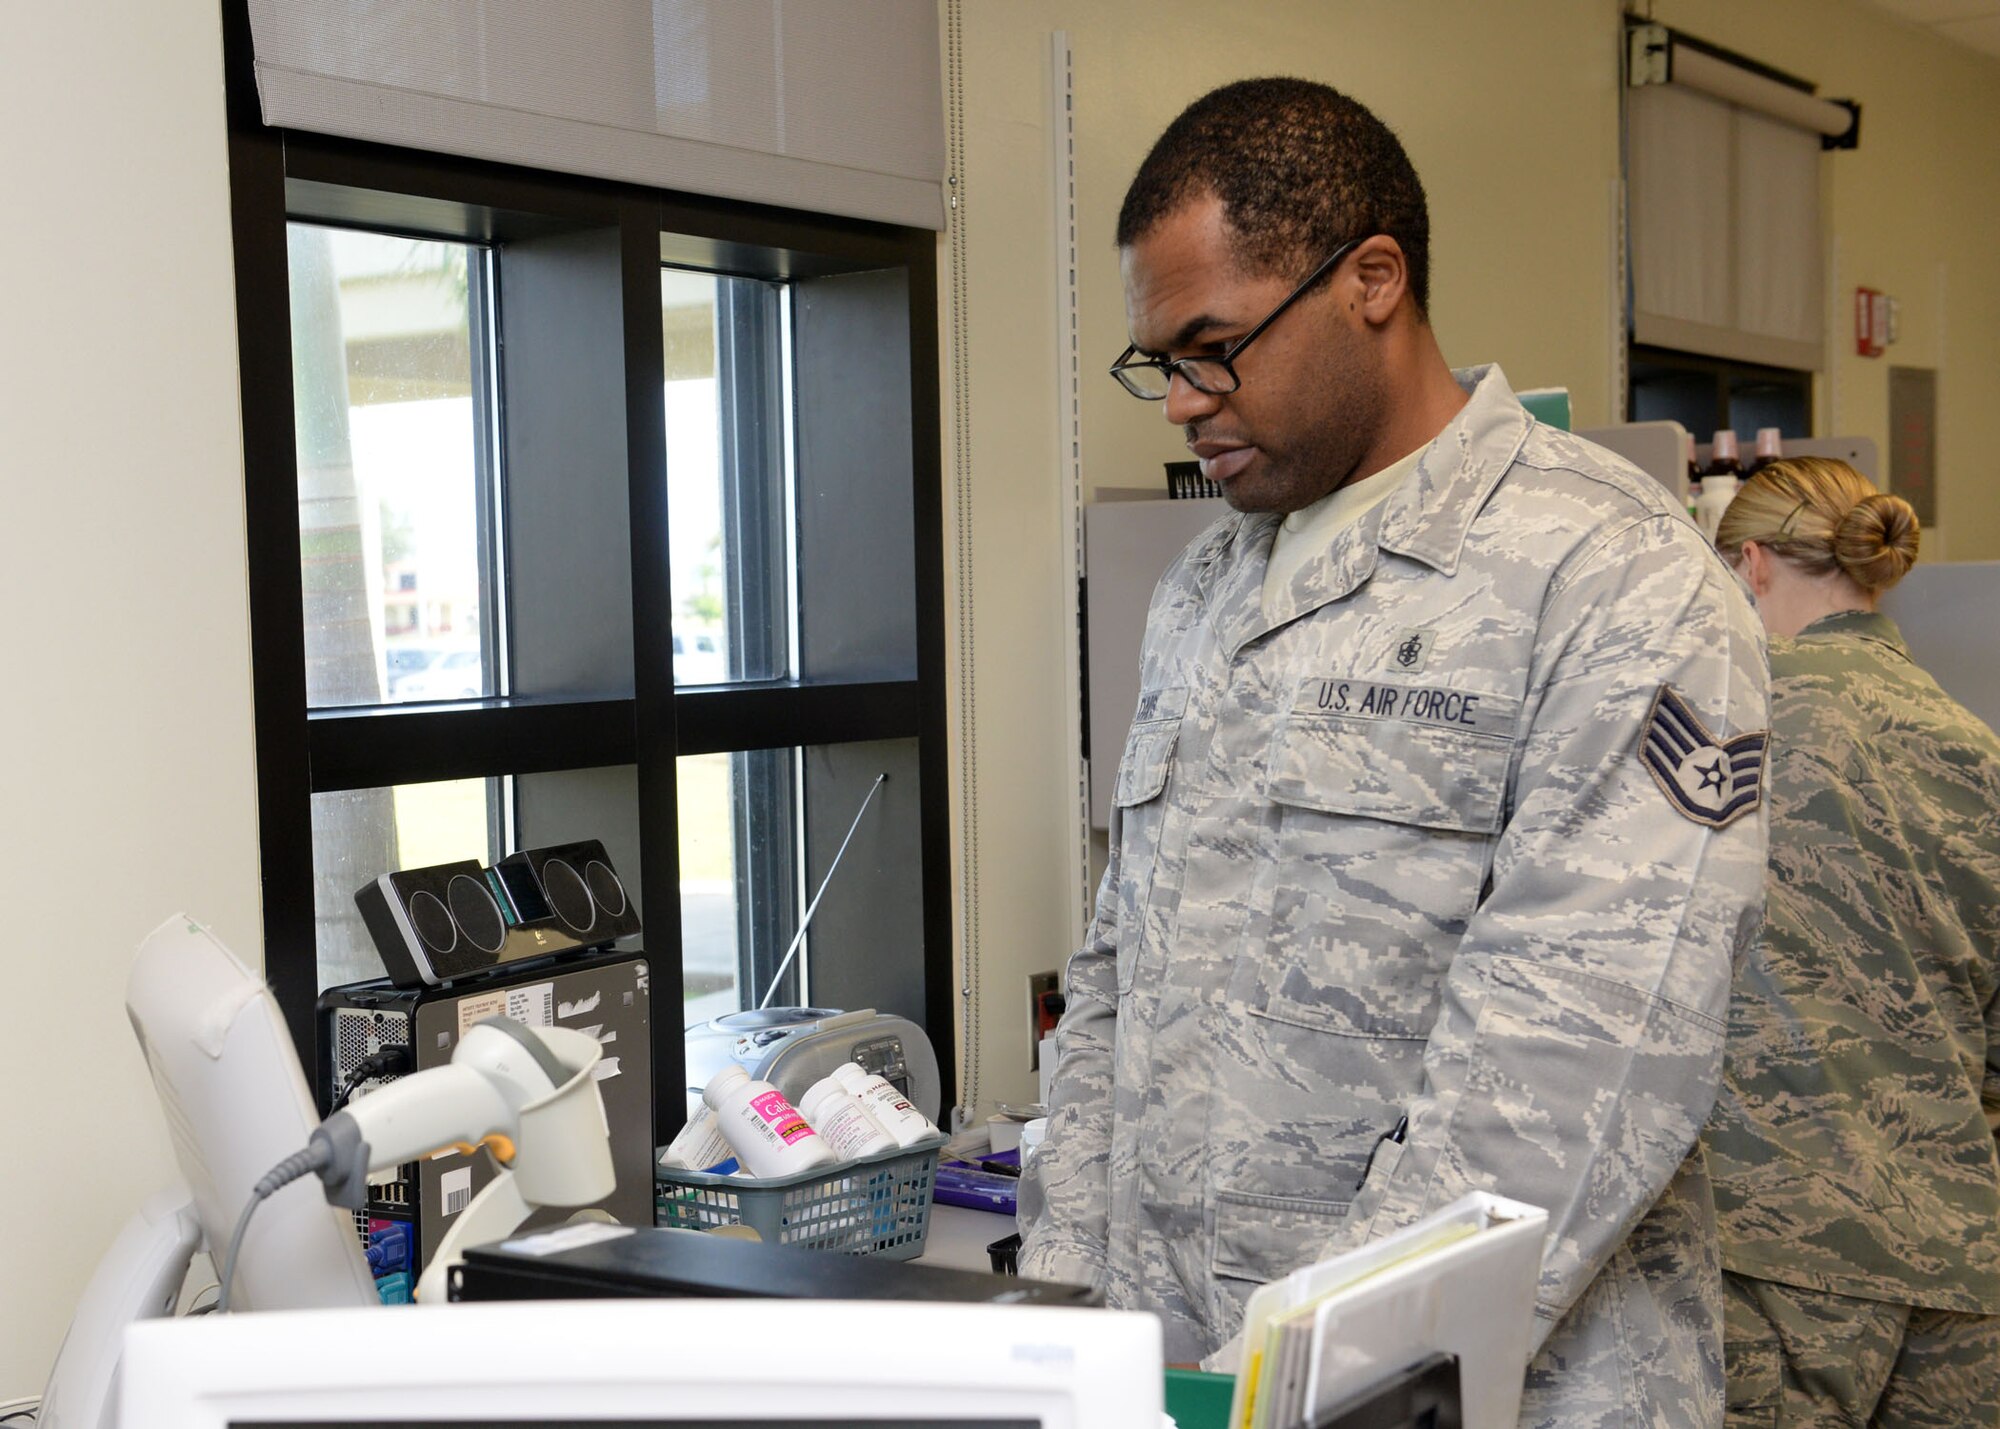 Staff Sgt. Jeremy Davis, 36th Medical Support Squadron pharmacy technician, prints out prescriptions for patients July 1, 2015, at Andersen Air Force Base, Guam. The unit consists of three pharmacy technicians and two pharmacists working in unison to ensure Team Andersen members receive the proper medications. (U.S. Air Force photo by Airman 1st Class Joshua Smoot/Released)